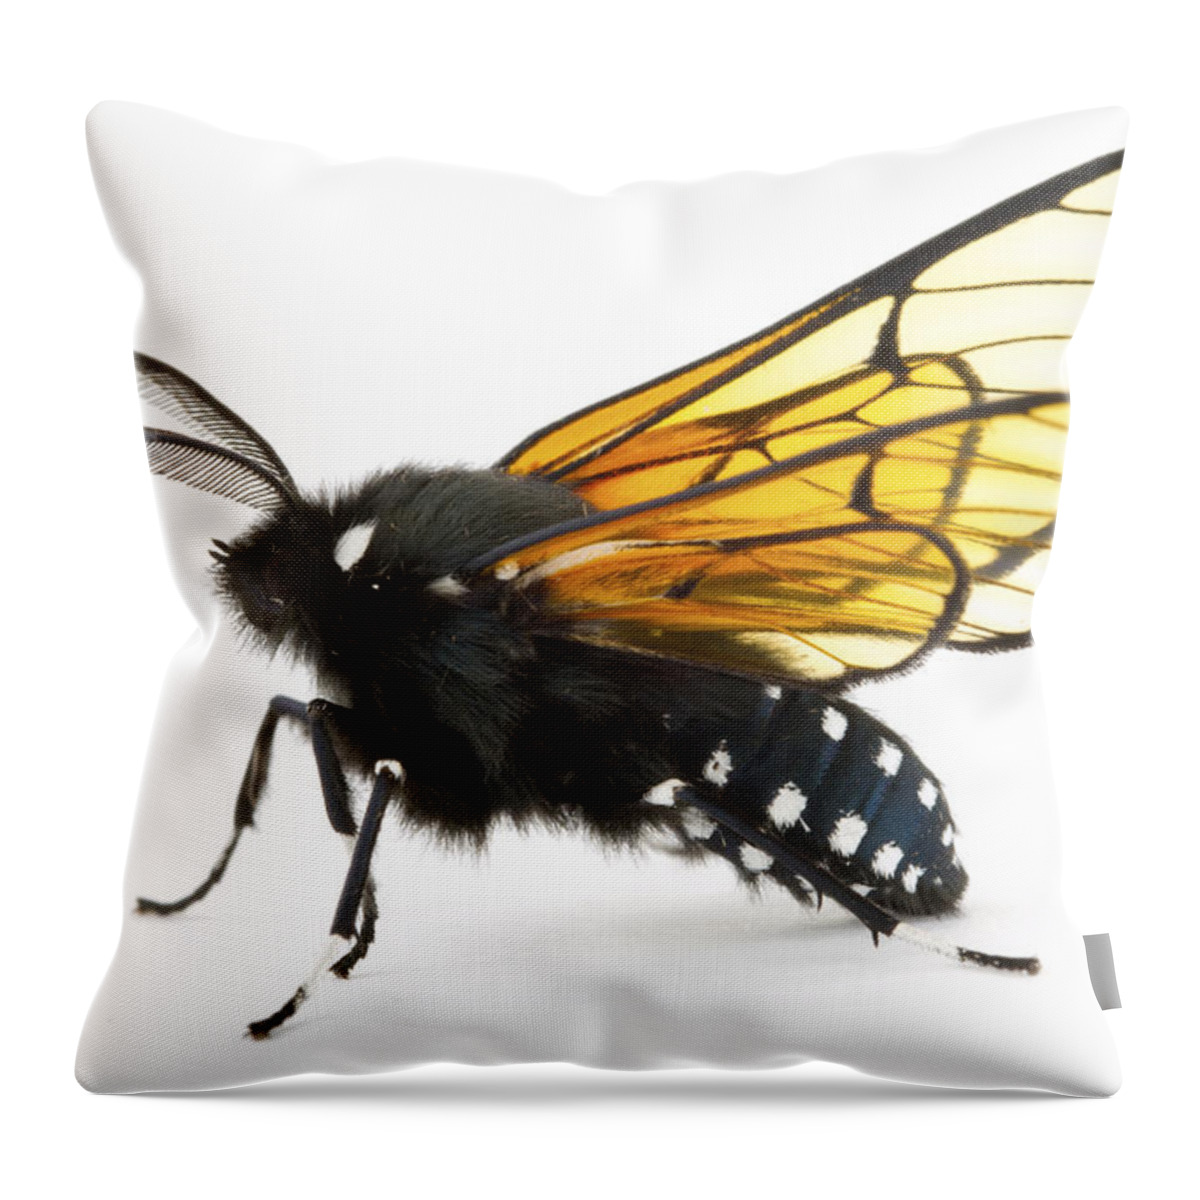 00478786 Throw Pillow featuring the photograph Scape Moth Costa Rica by Piotr Naskrecki